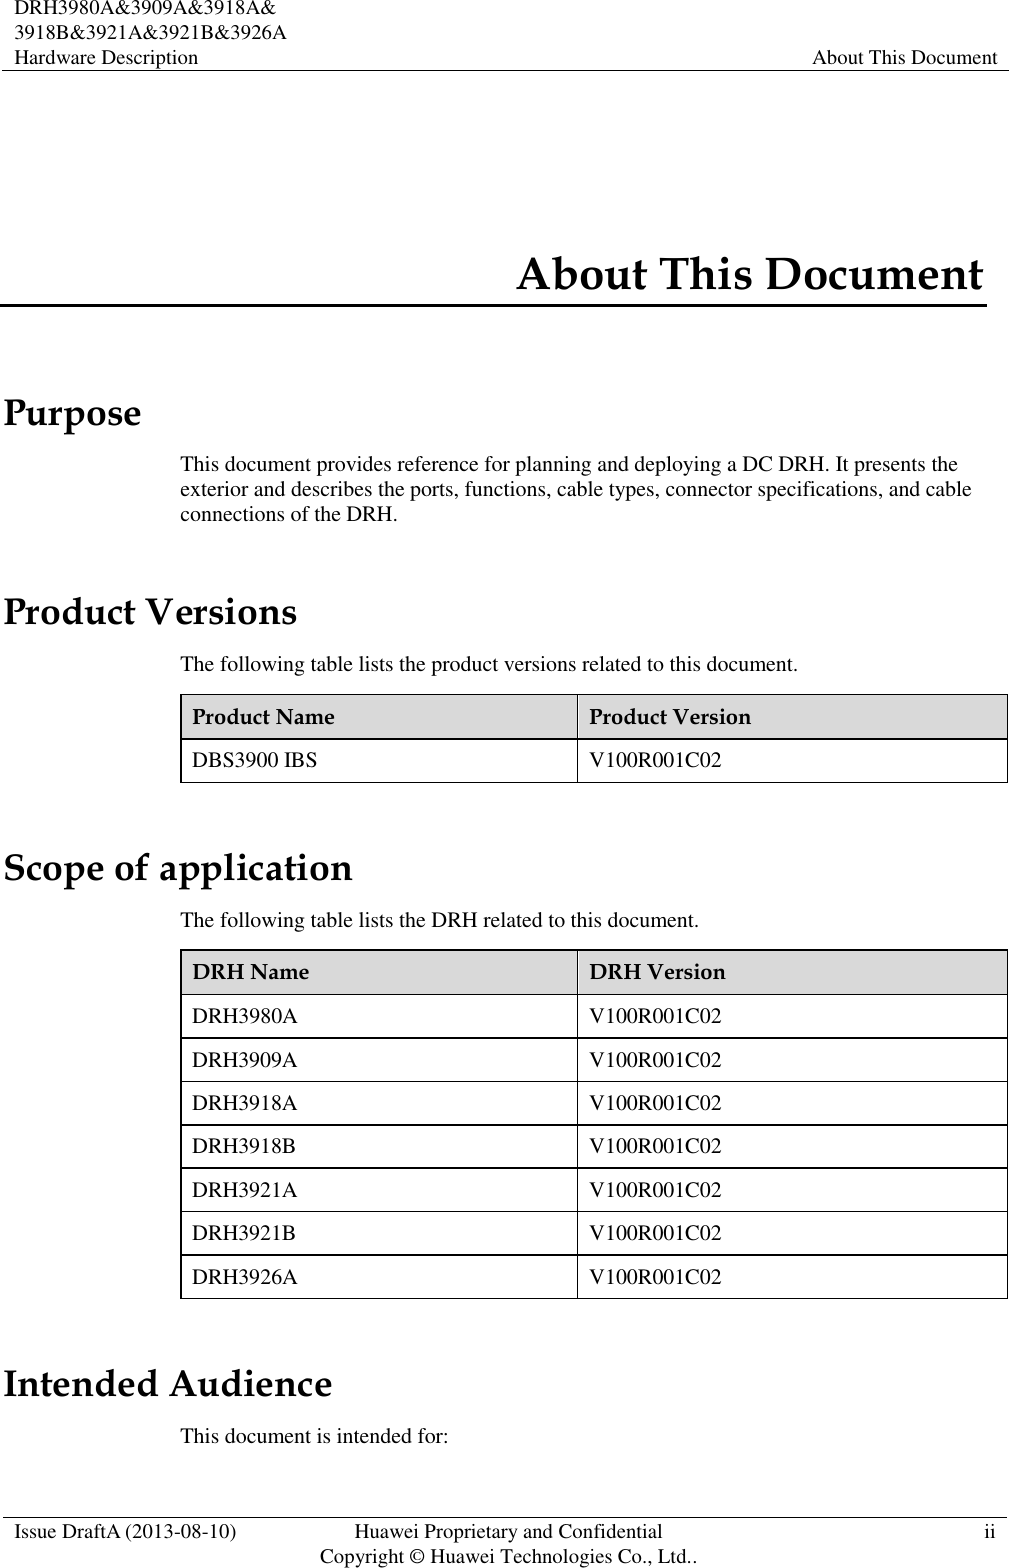  DRH3980A&amp;3909A&amp;3918A&amp; 3918B&amp;3921A&amp;3921B&amp;3926A Hardware Description About This Document  Issue DraftA (2013-08-10) Huawei Proprietary and Confidential                                     Copyright © Huawei Technologies Co., Ltd.. ii    About This Document Purpose This document provides reference for planning and deploying a DC DRH. It presents the exterior and describes the ports, functions, cable types, connector specifications, and cable connections of the DRH. Product Versions The following table lists the product versions related to this document. Product Name Product Version DBS3900 IBS V100R001C02 Scope of application The following table lists the DRH related to this document. DRH Name DRH Version DRH3980A V100R001C02 DRH3909A V100R001C02 DRH3918A V100R001C02 DRH3918B V100R001C02 DRH3921A V100R001C02 DRH3921B V100R001C02 DRH3926A V100R001C02 Intended Audience This document is intended for: 